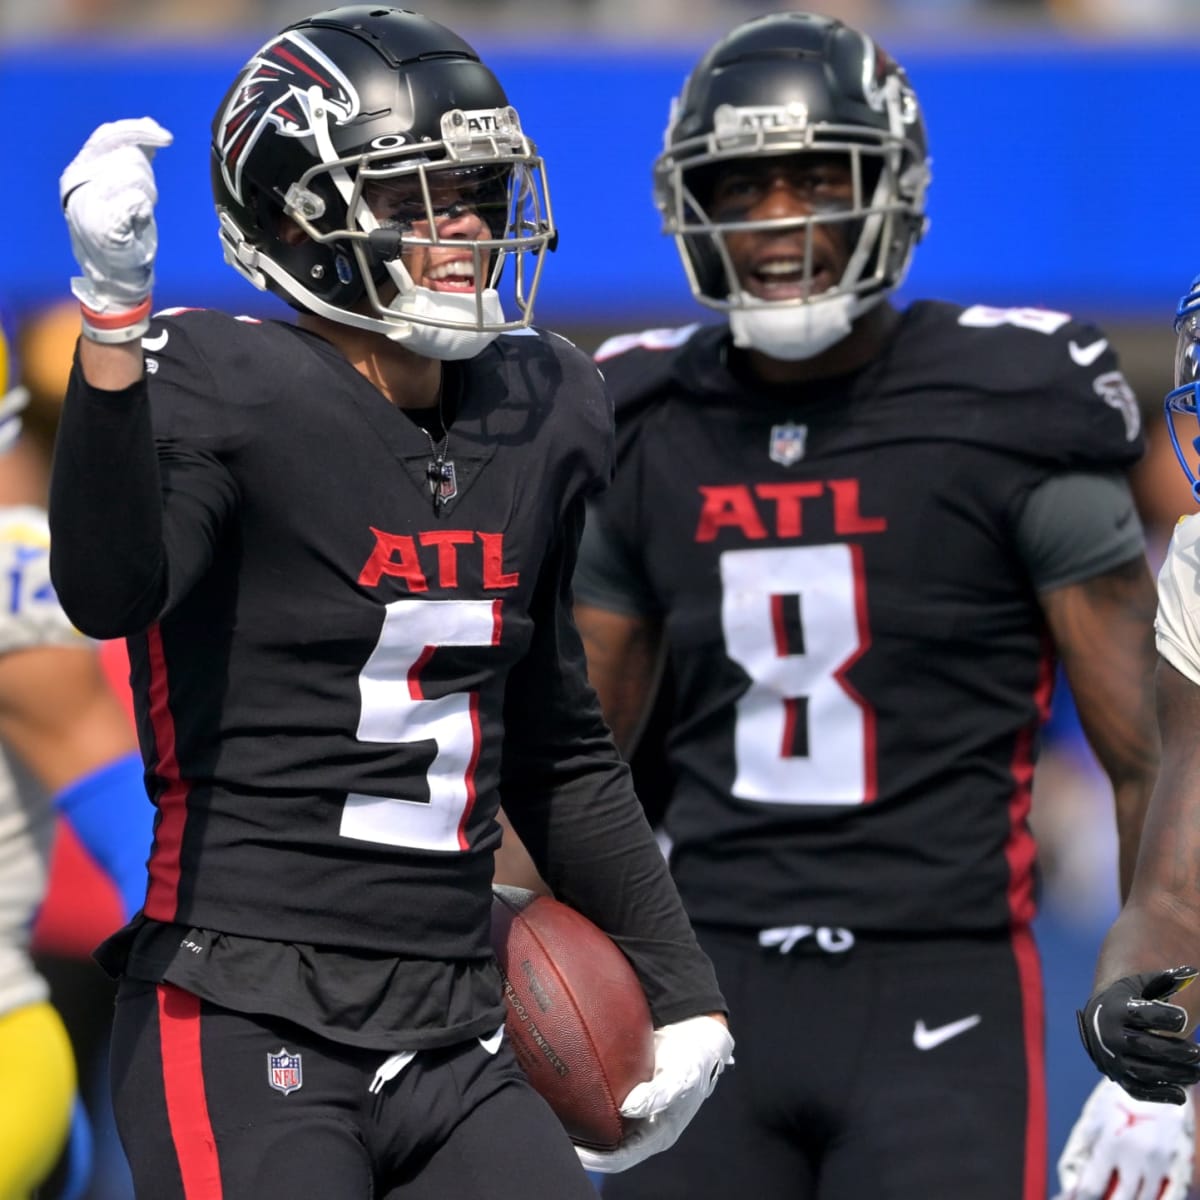 A year later, the Atlanta Falcons uniforms are the best in the NFL